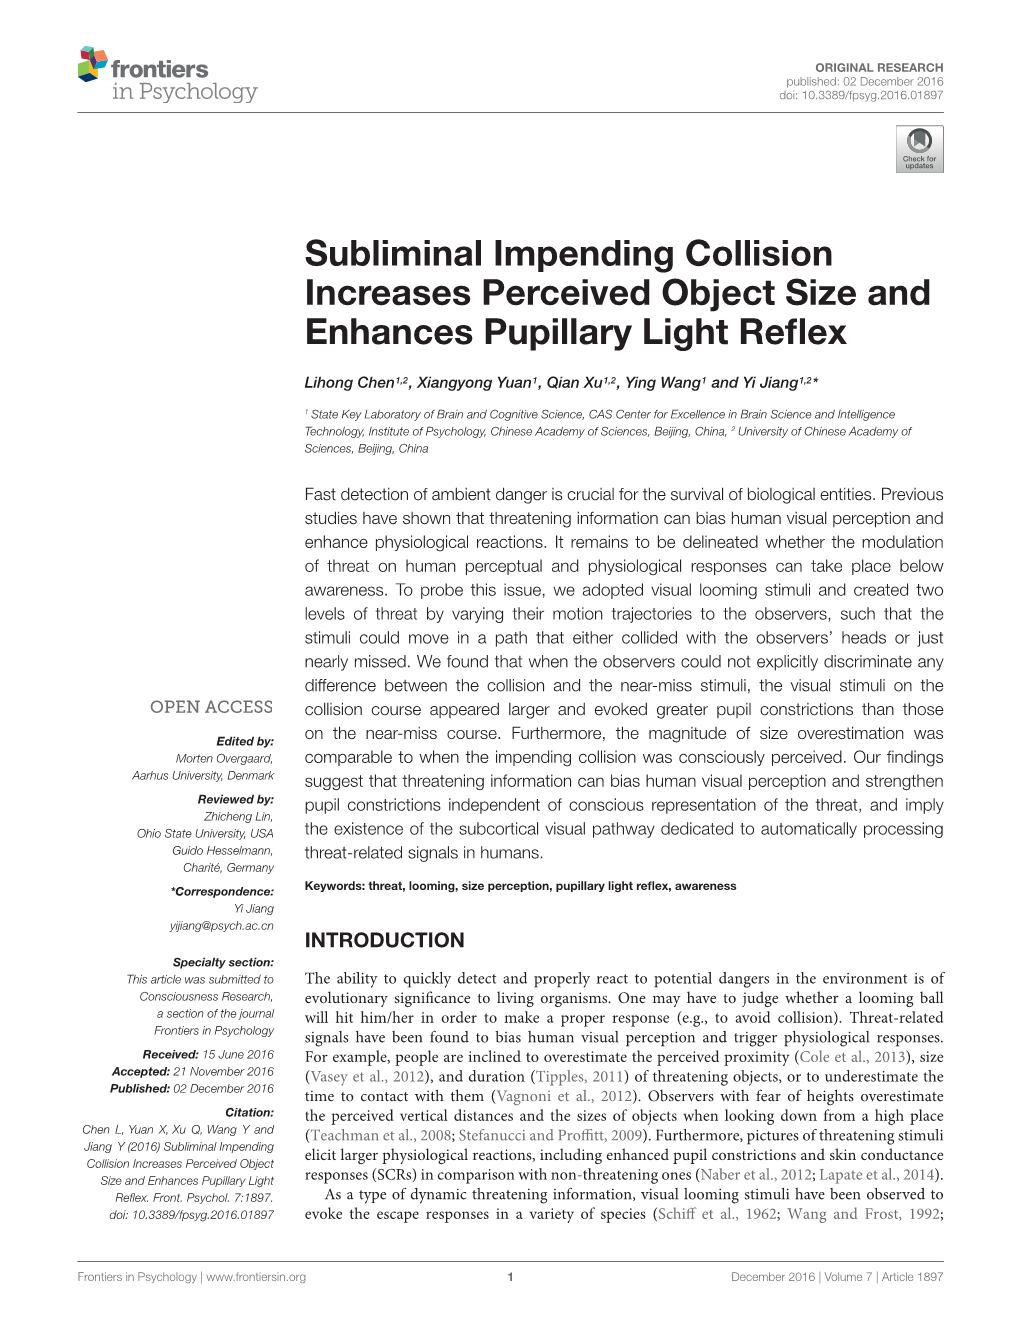 Subliminal Impending Collision Increases Perceived Object Size and Enhances Pupillary Light Reflex